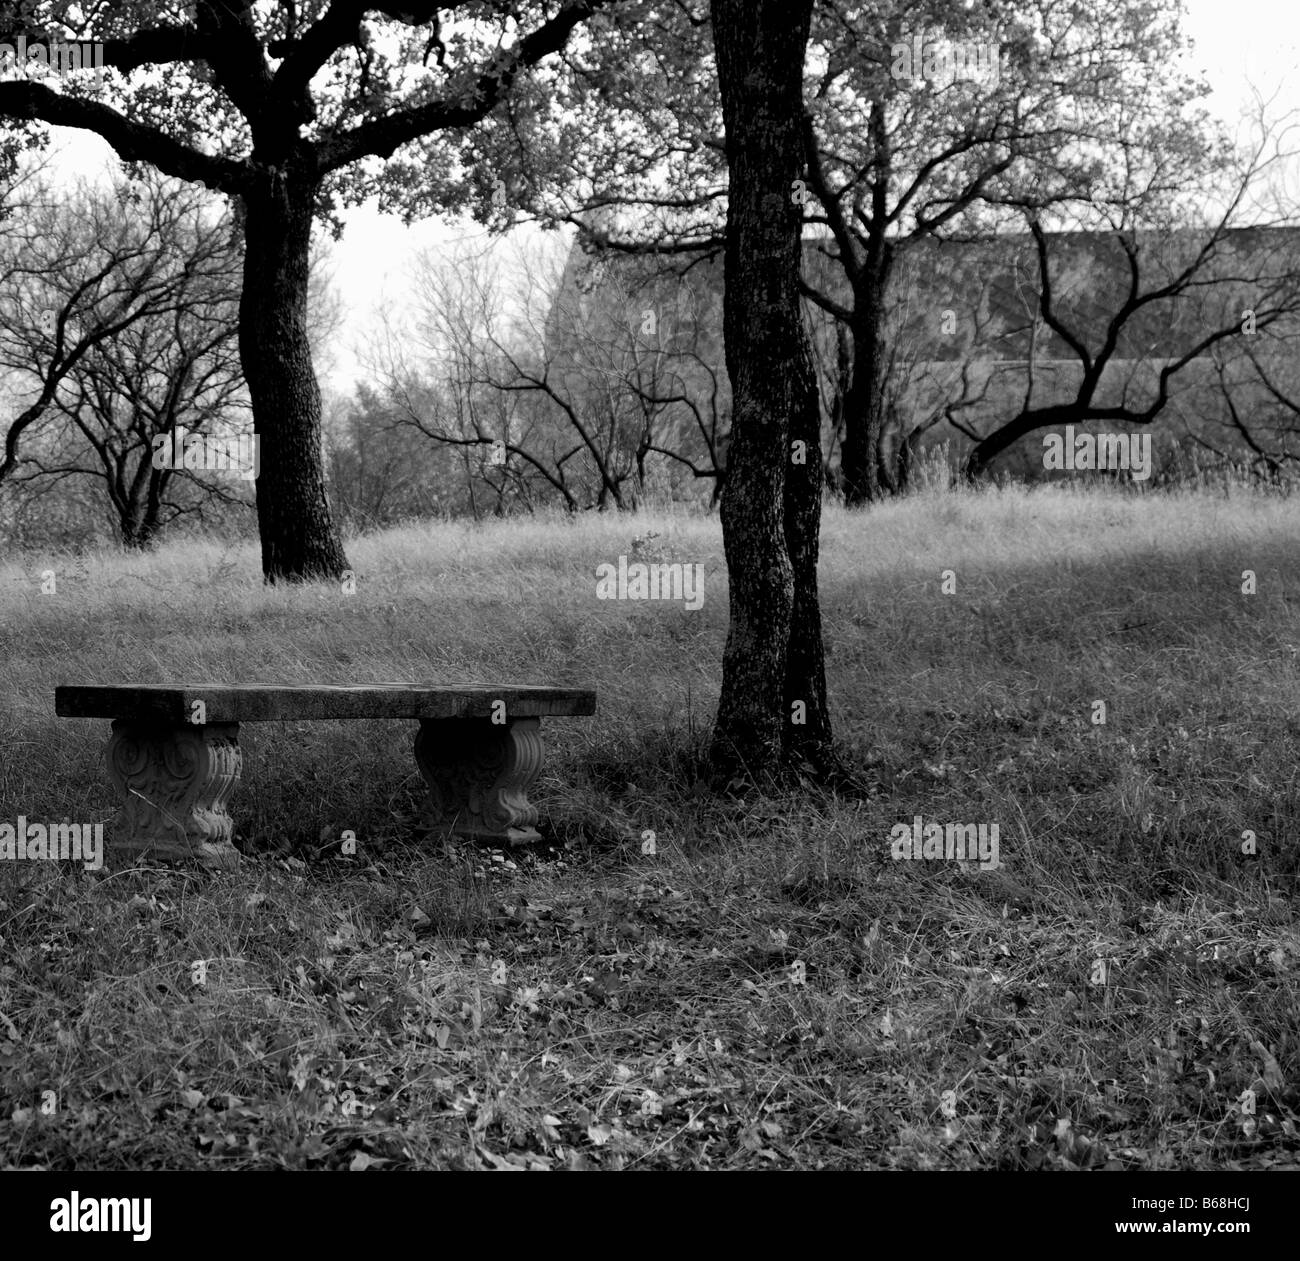 black and white image of an empty bench next to a tree Stock Photo